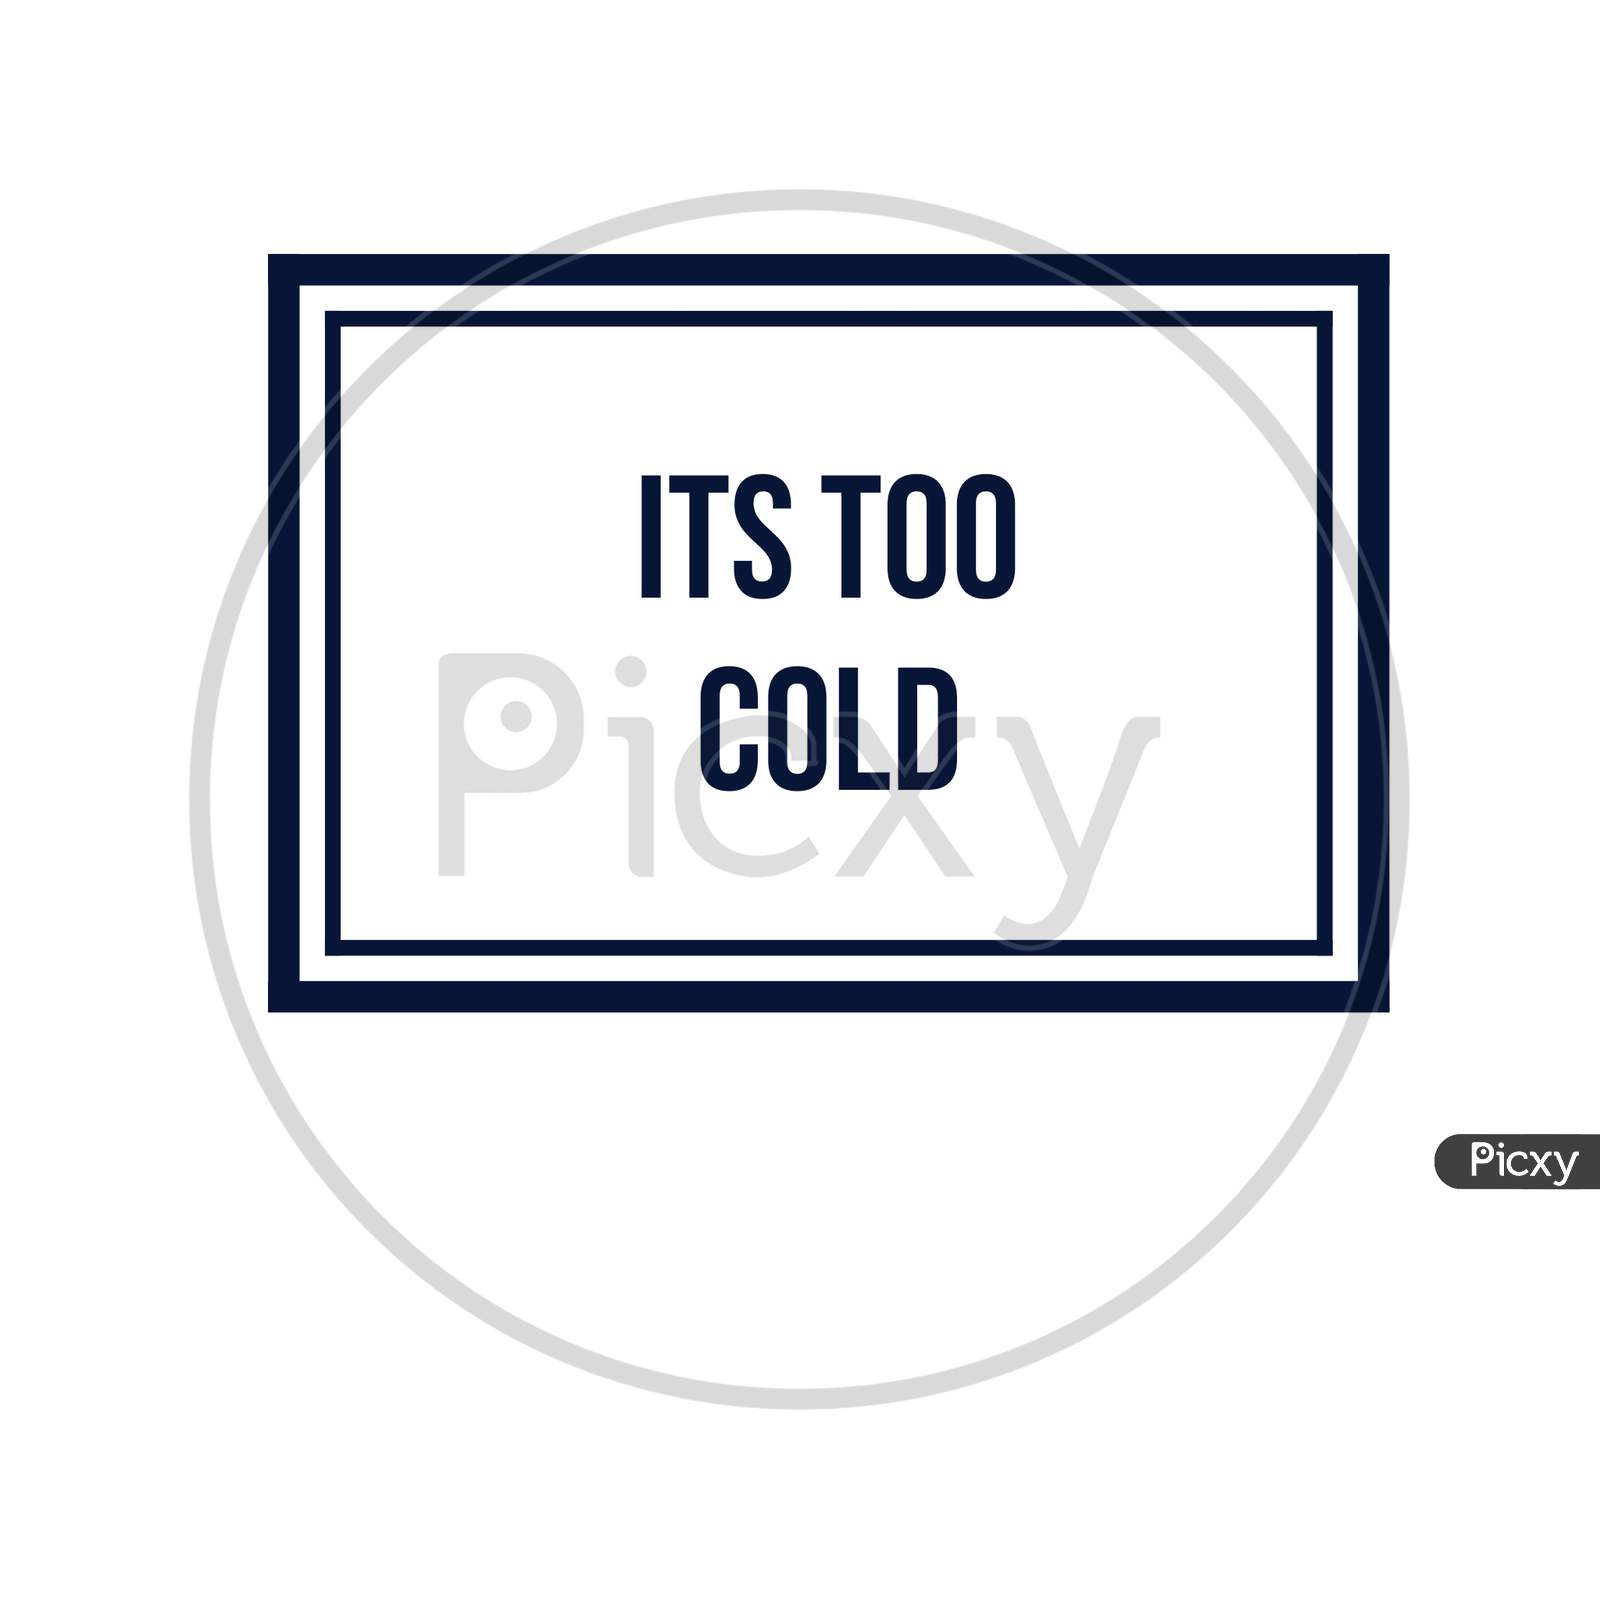 Image With A Text Box "Its Too Cold"